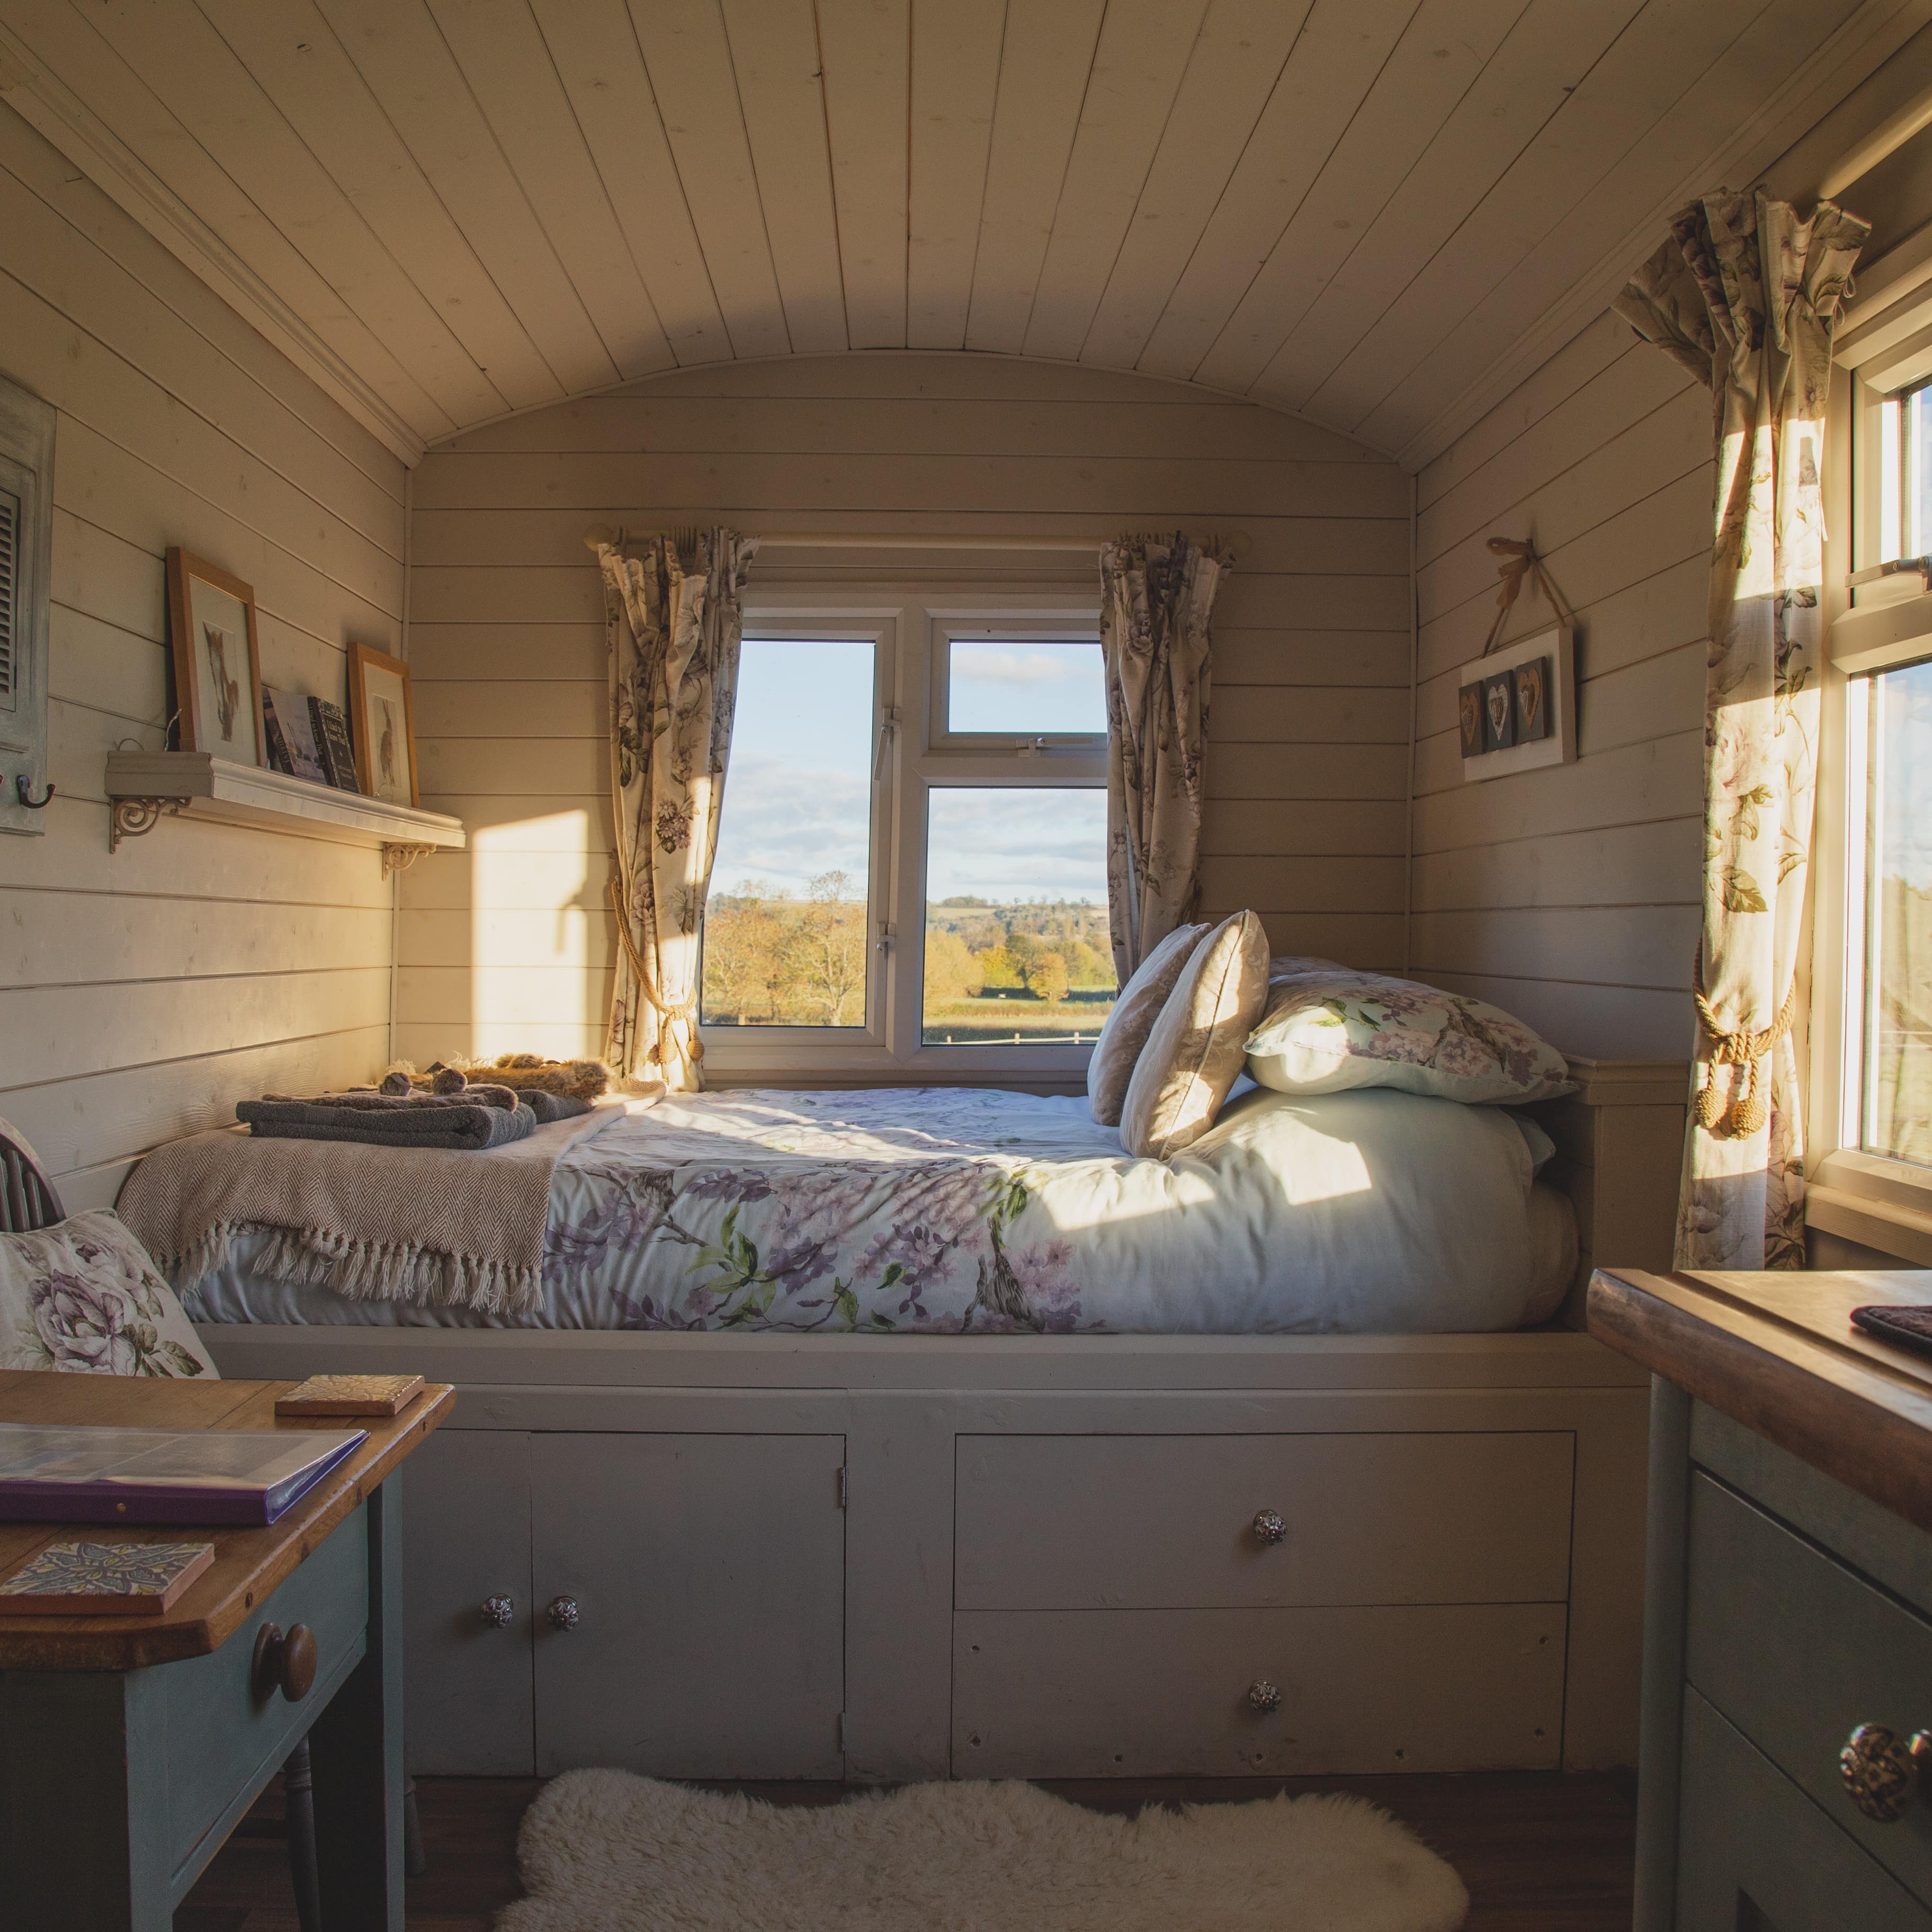 Bed and indoor view of a tiny house